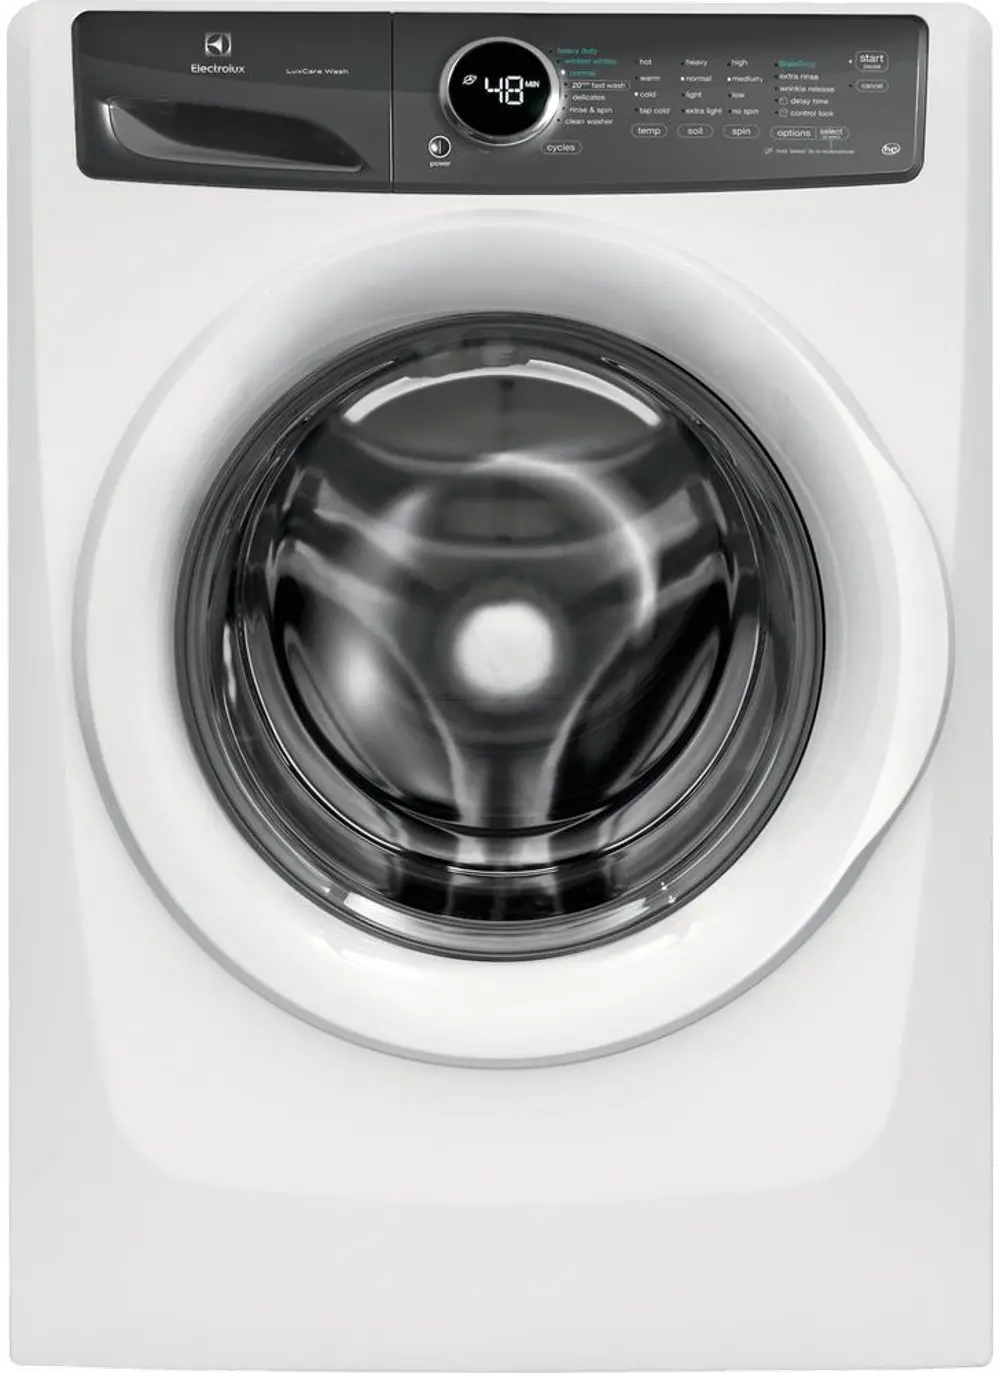 EFLW427UIW Electrolux Front Load Washer with StainTreat - 4.3 cu. ft. White-1